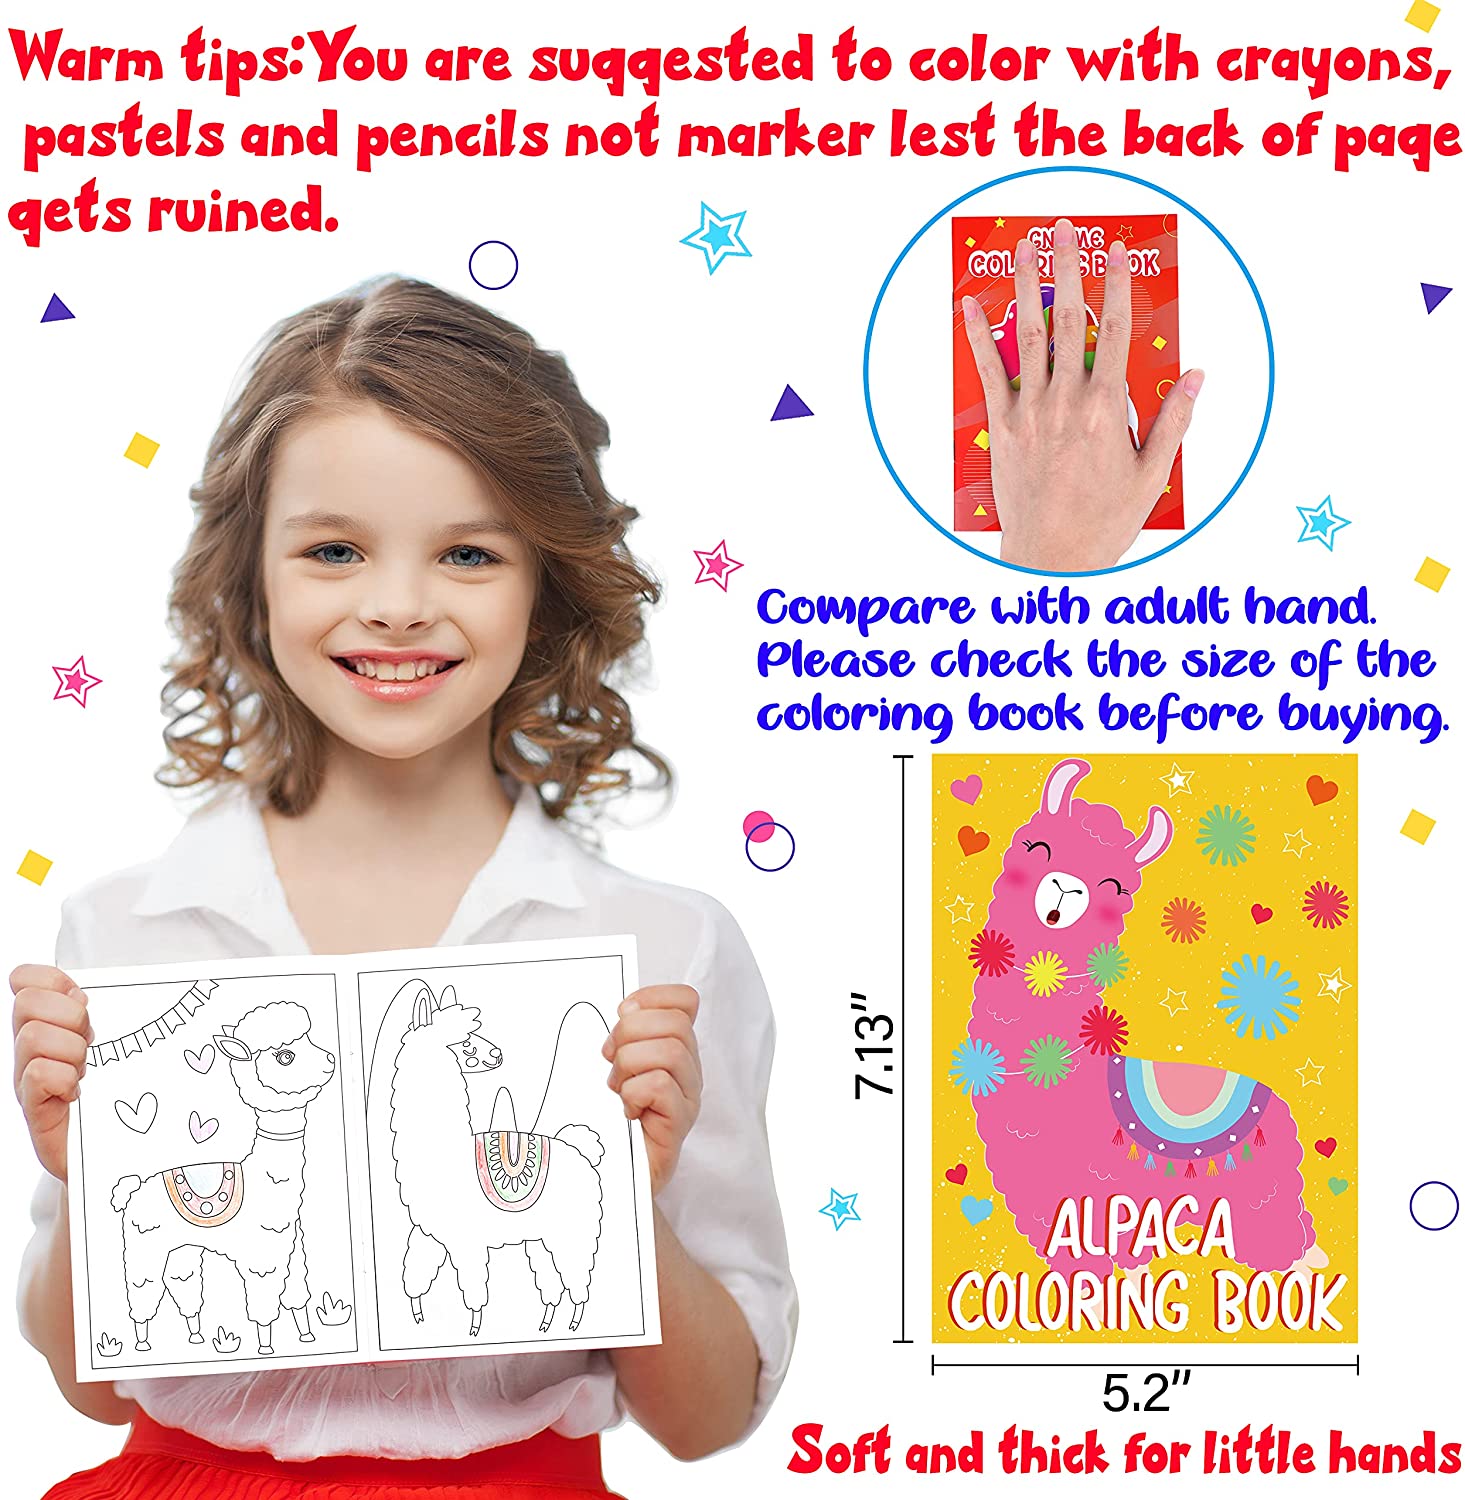 16 x Coloring Books for Kids Ages 4-8